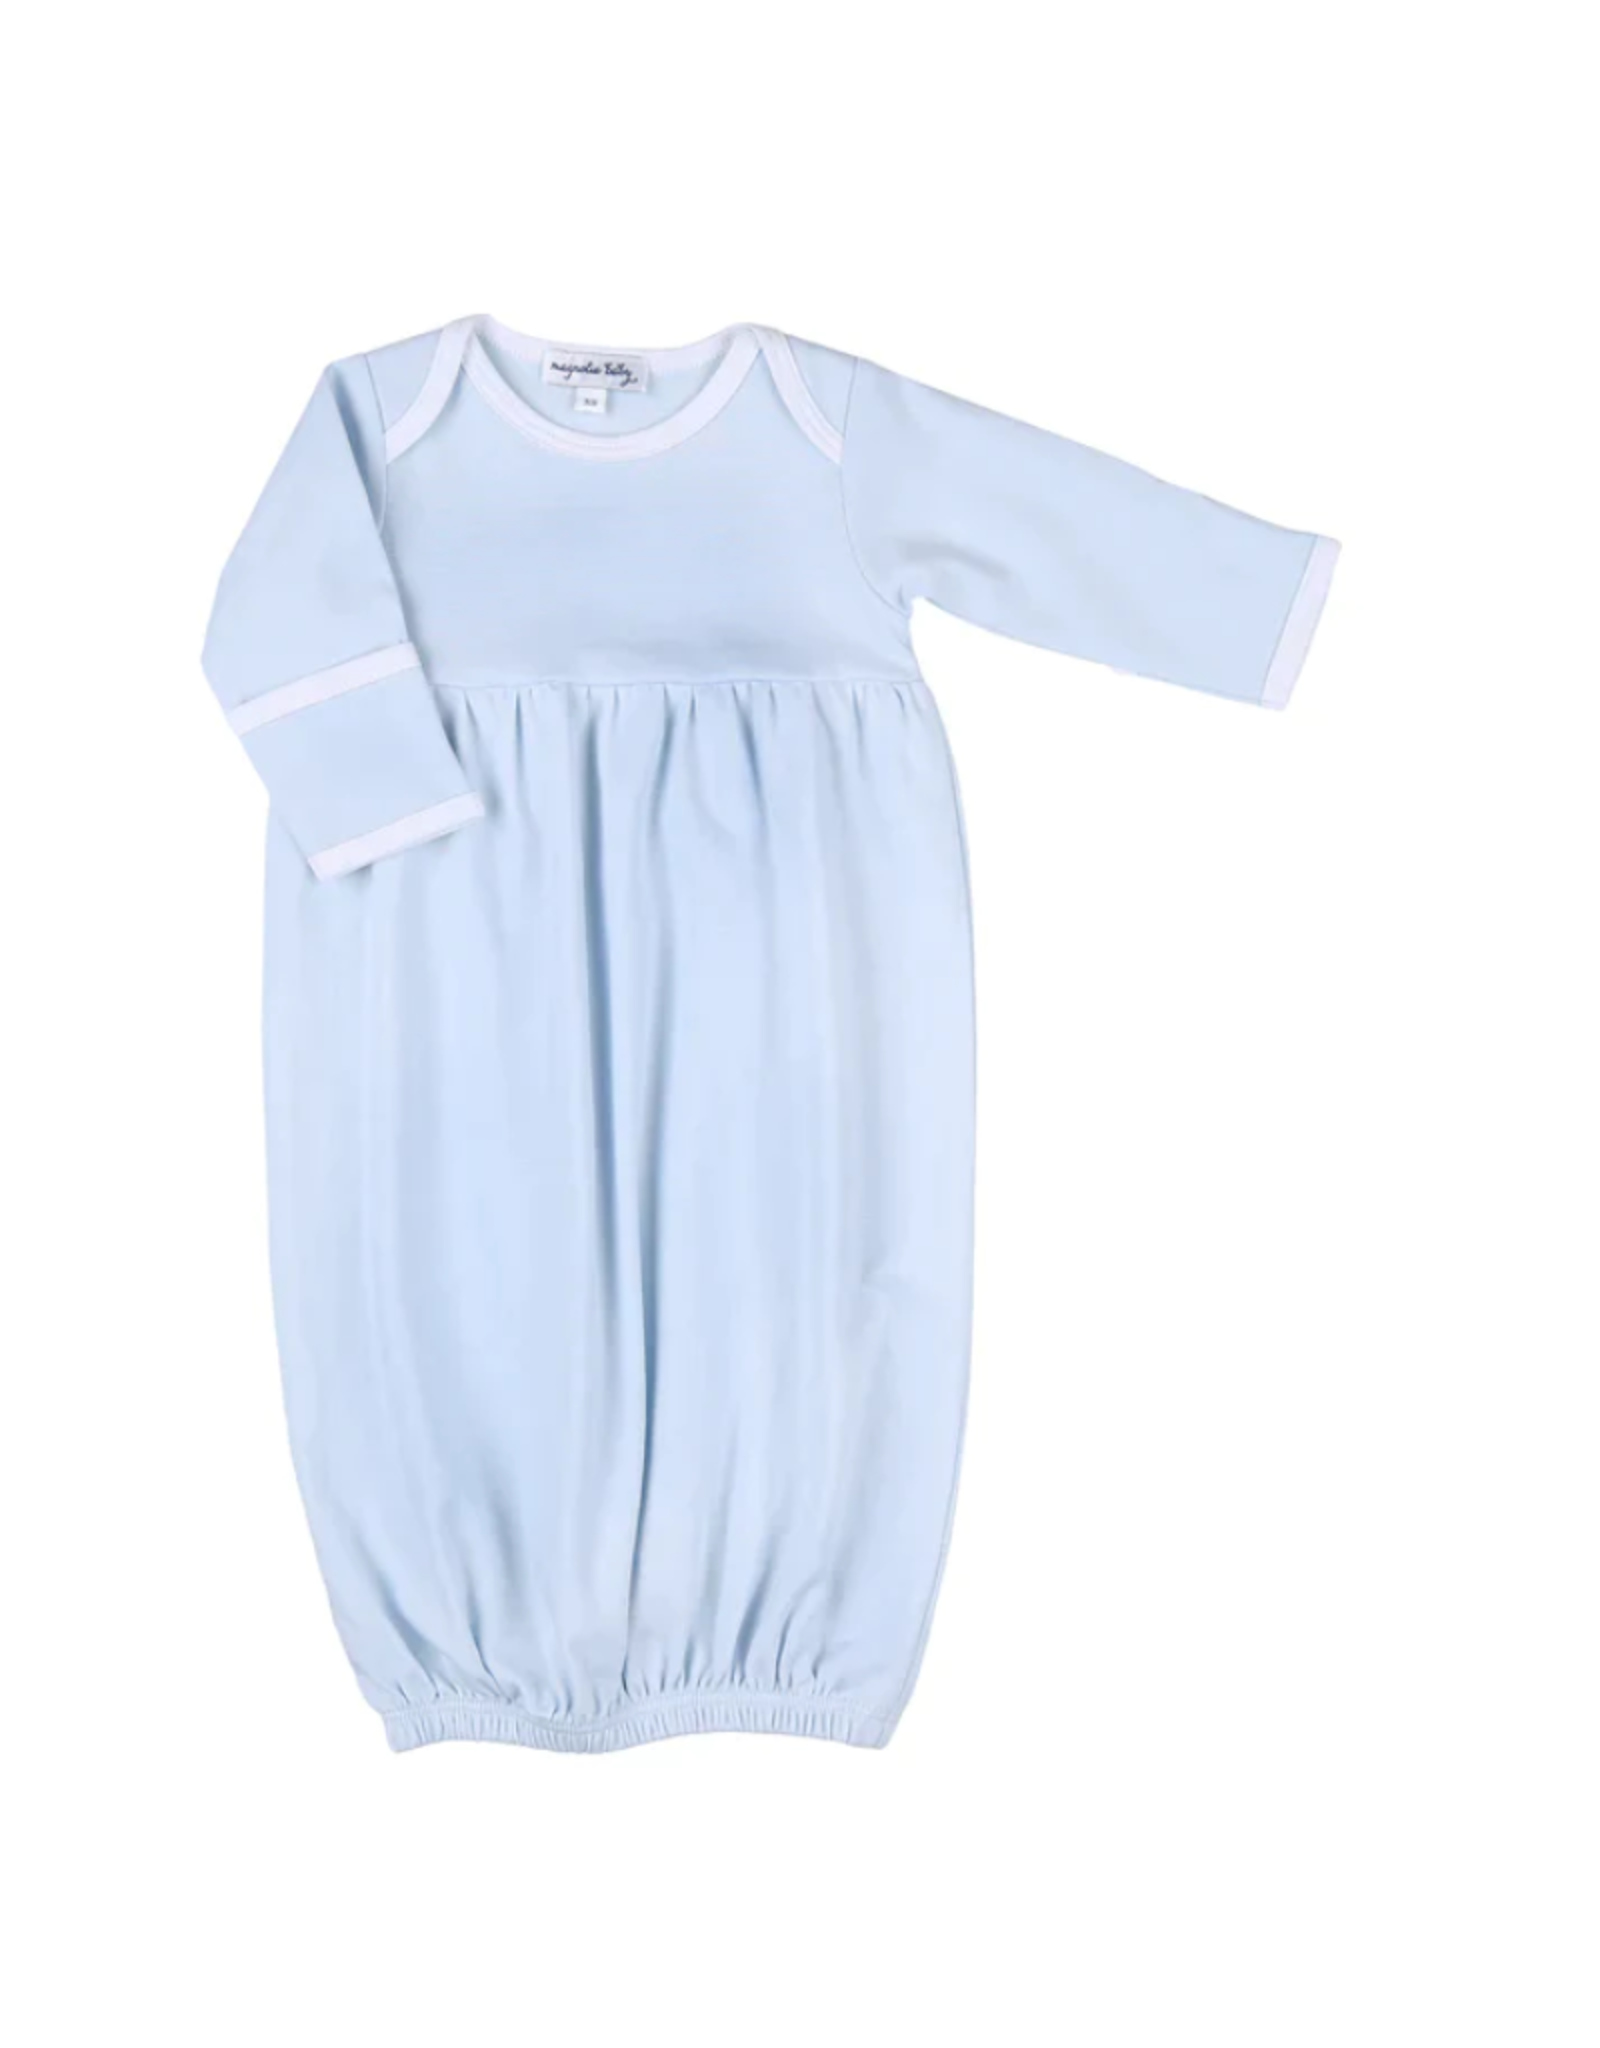 Magnolia Baby Simply Solids Gathered Gown, Light Blue